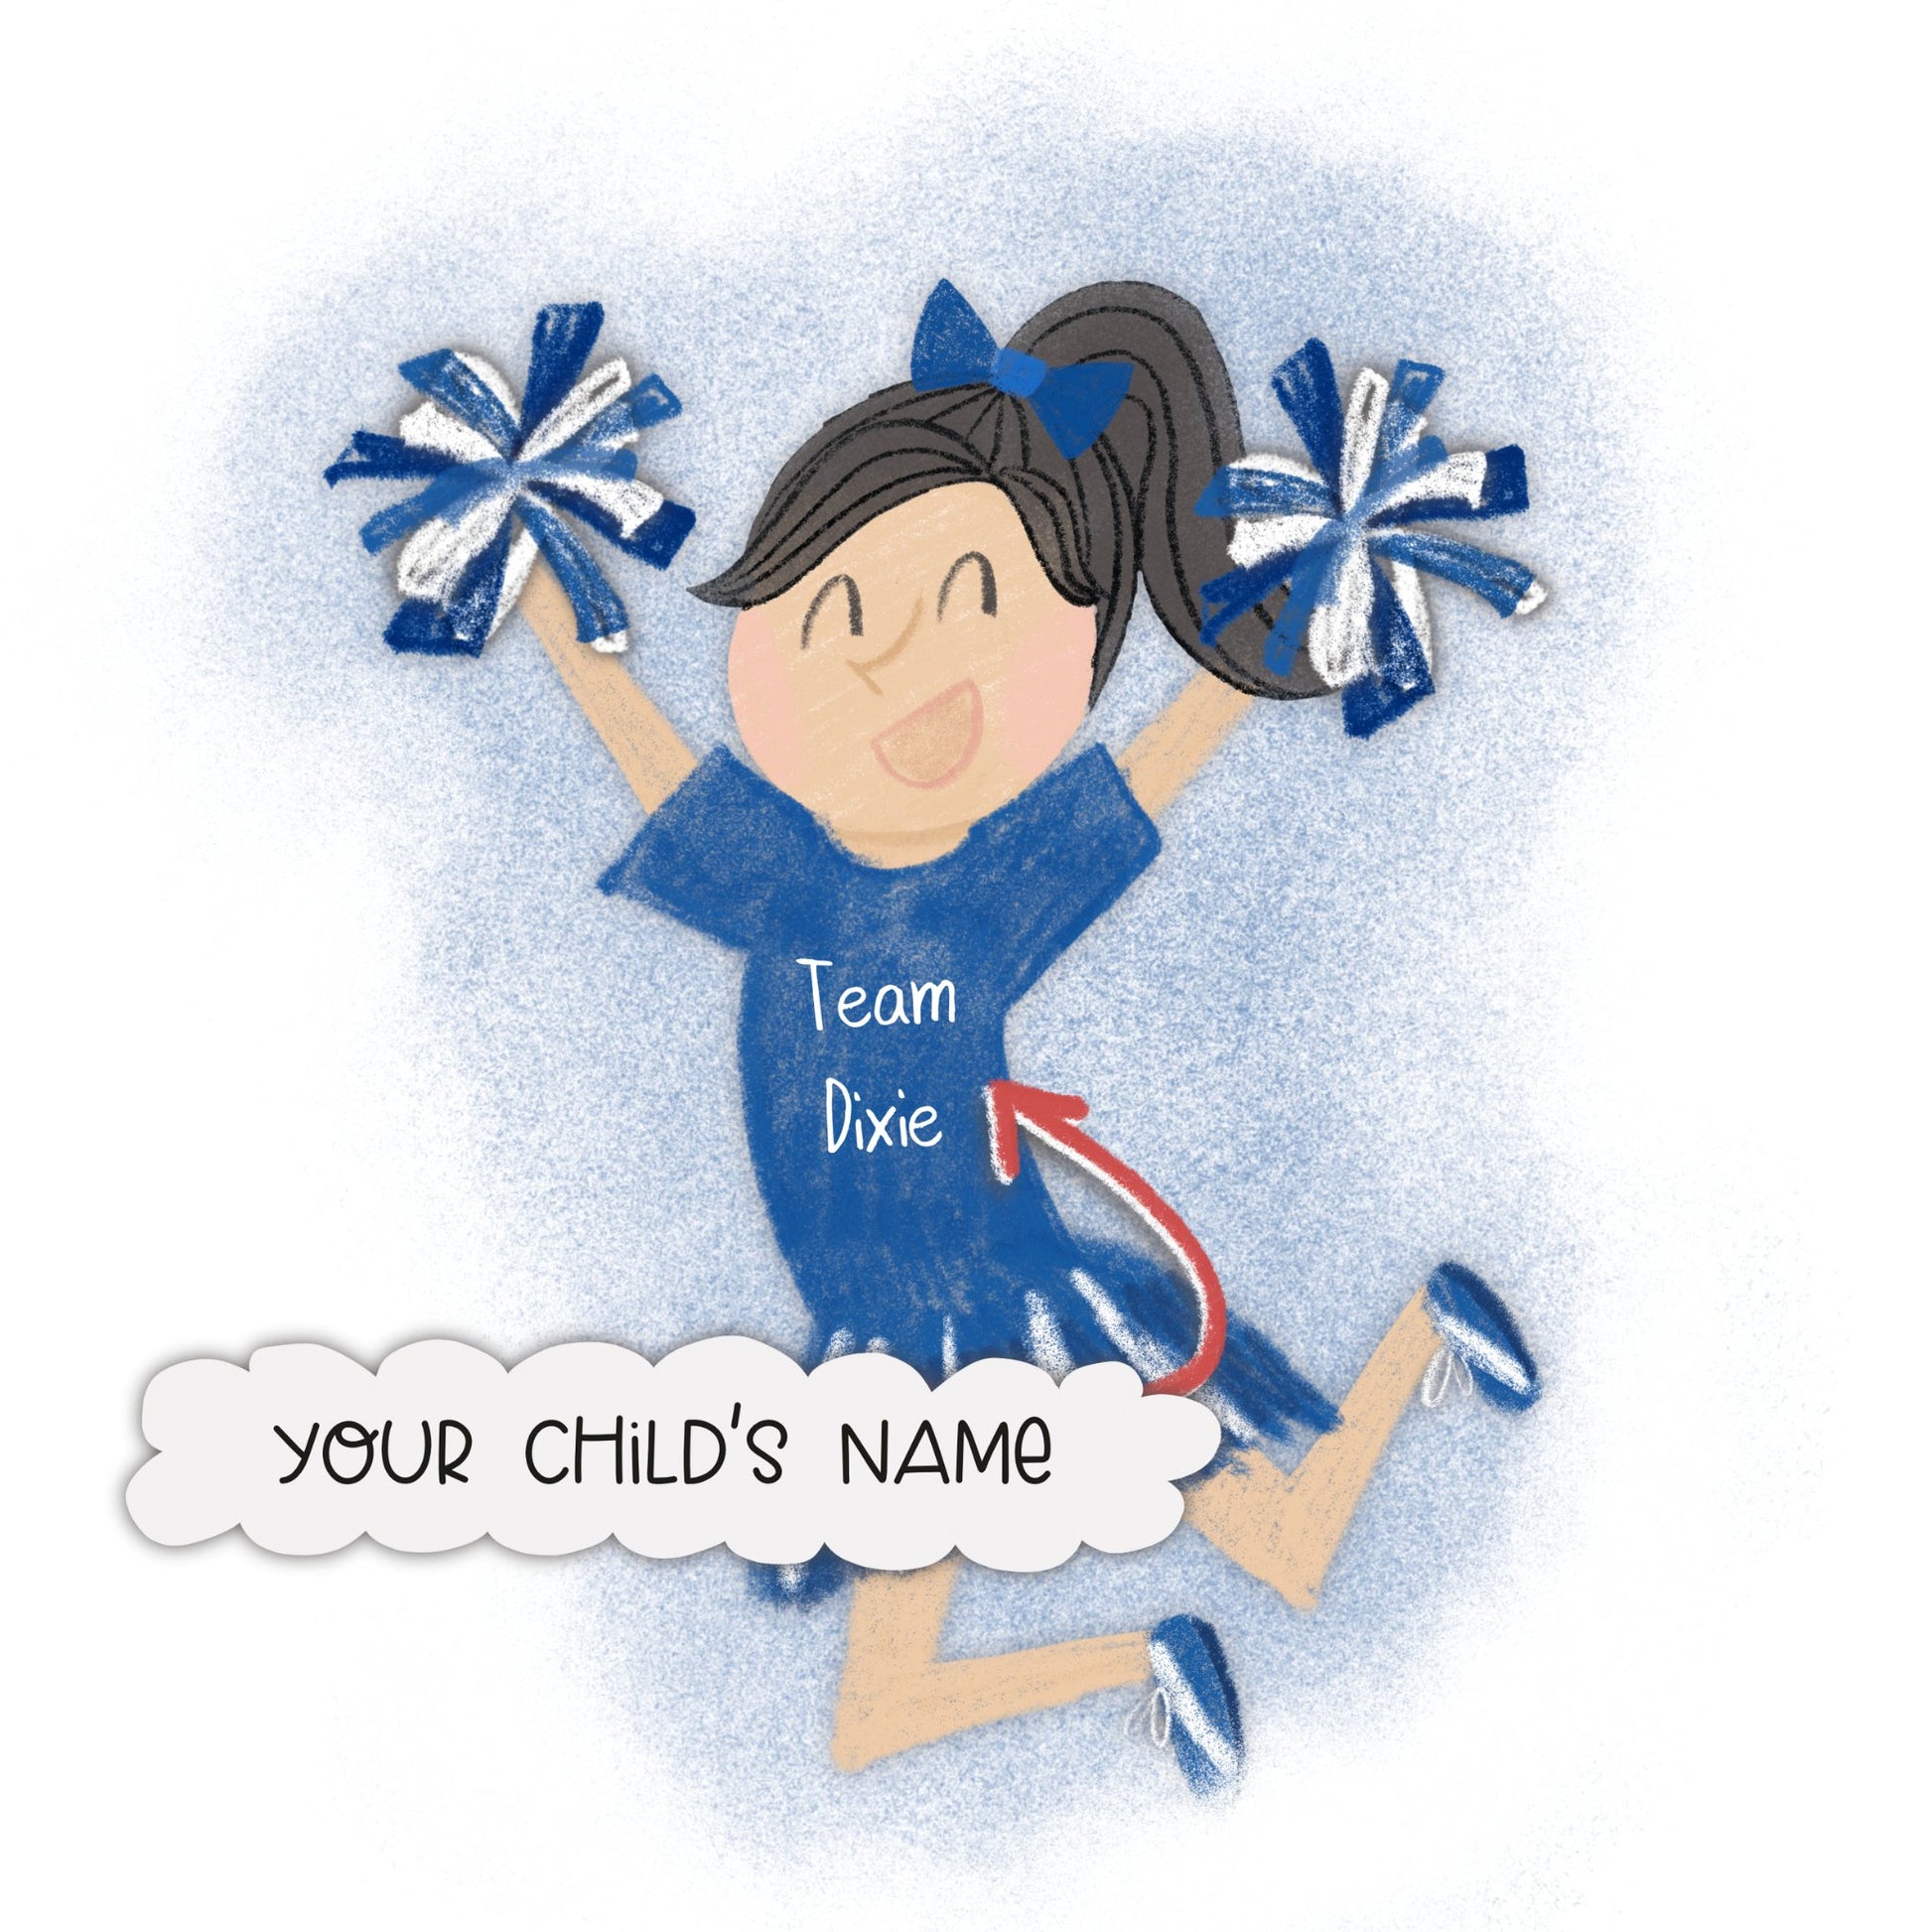 Image of one of the cheerleader personalized with the child's name that is included in the teacher gift set self published through Amazon KDP and Kindle Direct Publishing that includes a personalized copy of "You're More Than My Teacher."